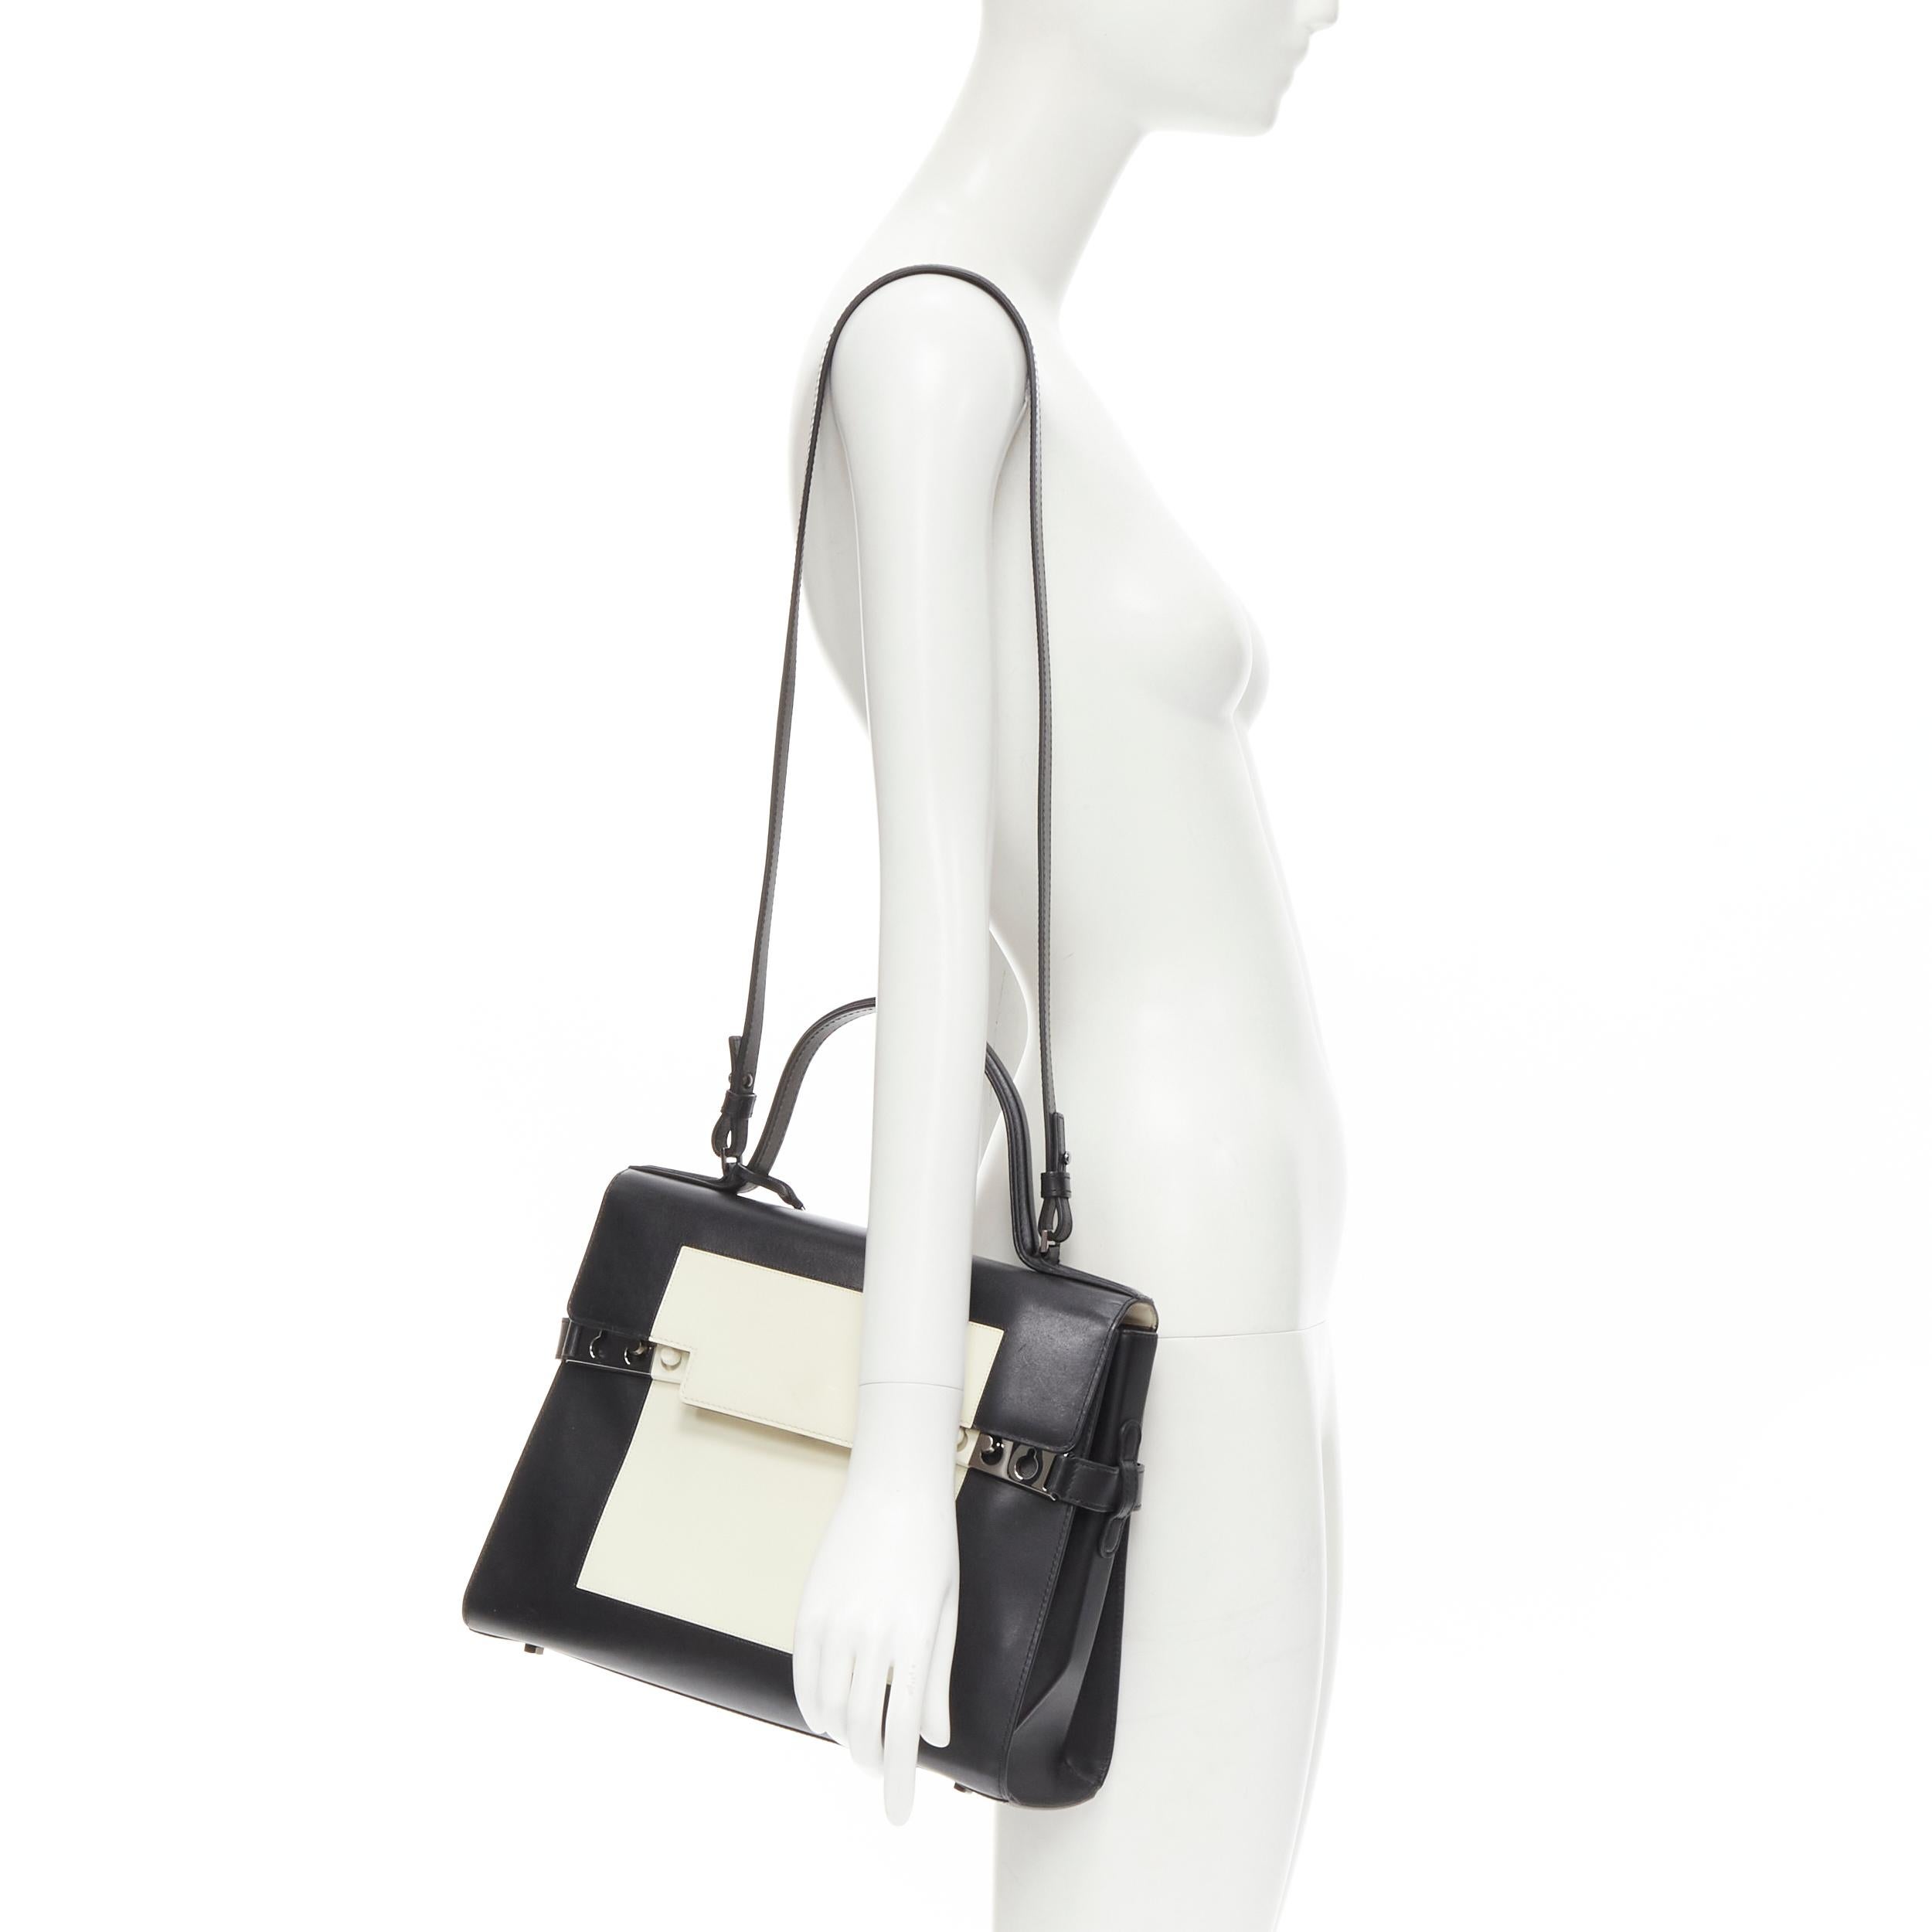 DELVAUX Tempete MM black leather white patent bicolor flap satchenl shoulder bag 
Reference: KEDG/A00112 
Brand: Delvaux 
Model: Tempete 
Material: Leather 
Color: Black 
Pattern: Solid 
Closure: Push lock 
Extra Detail: Black leather with white